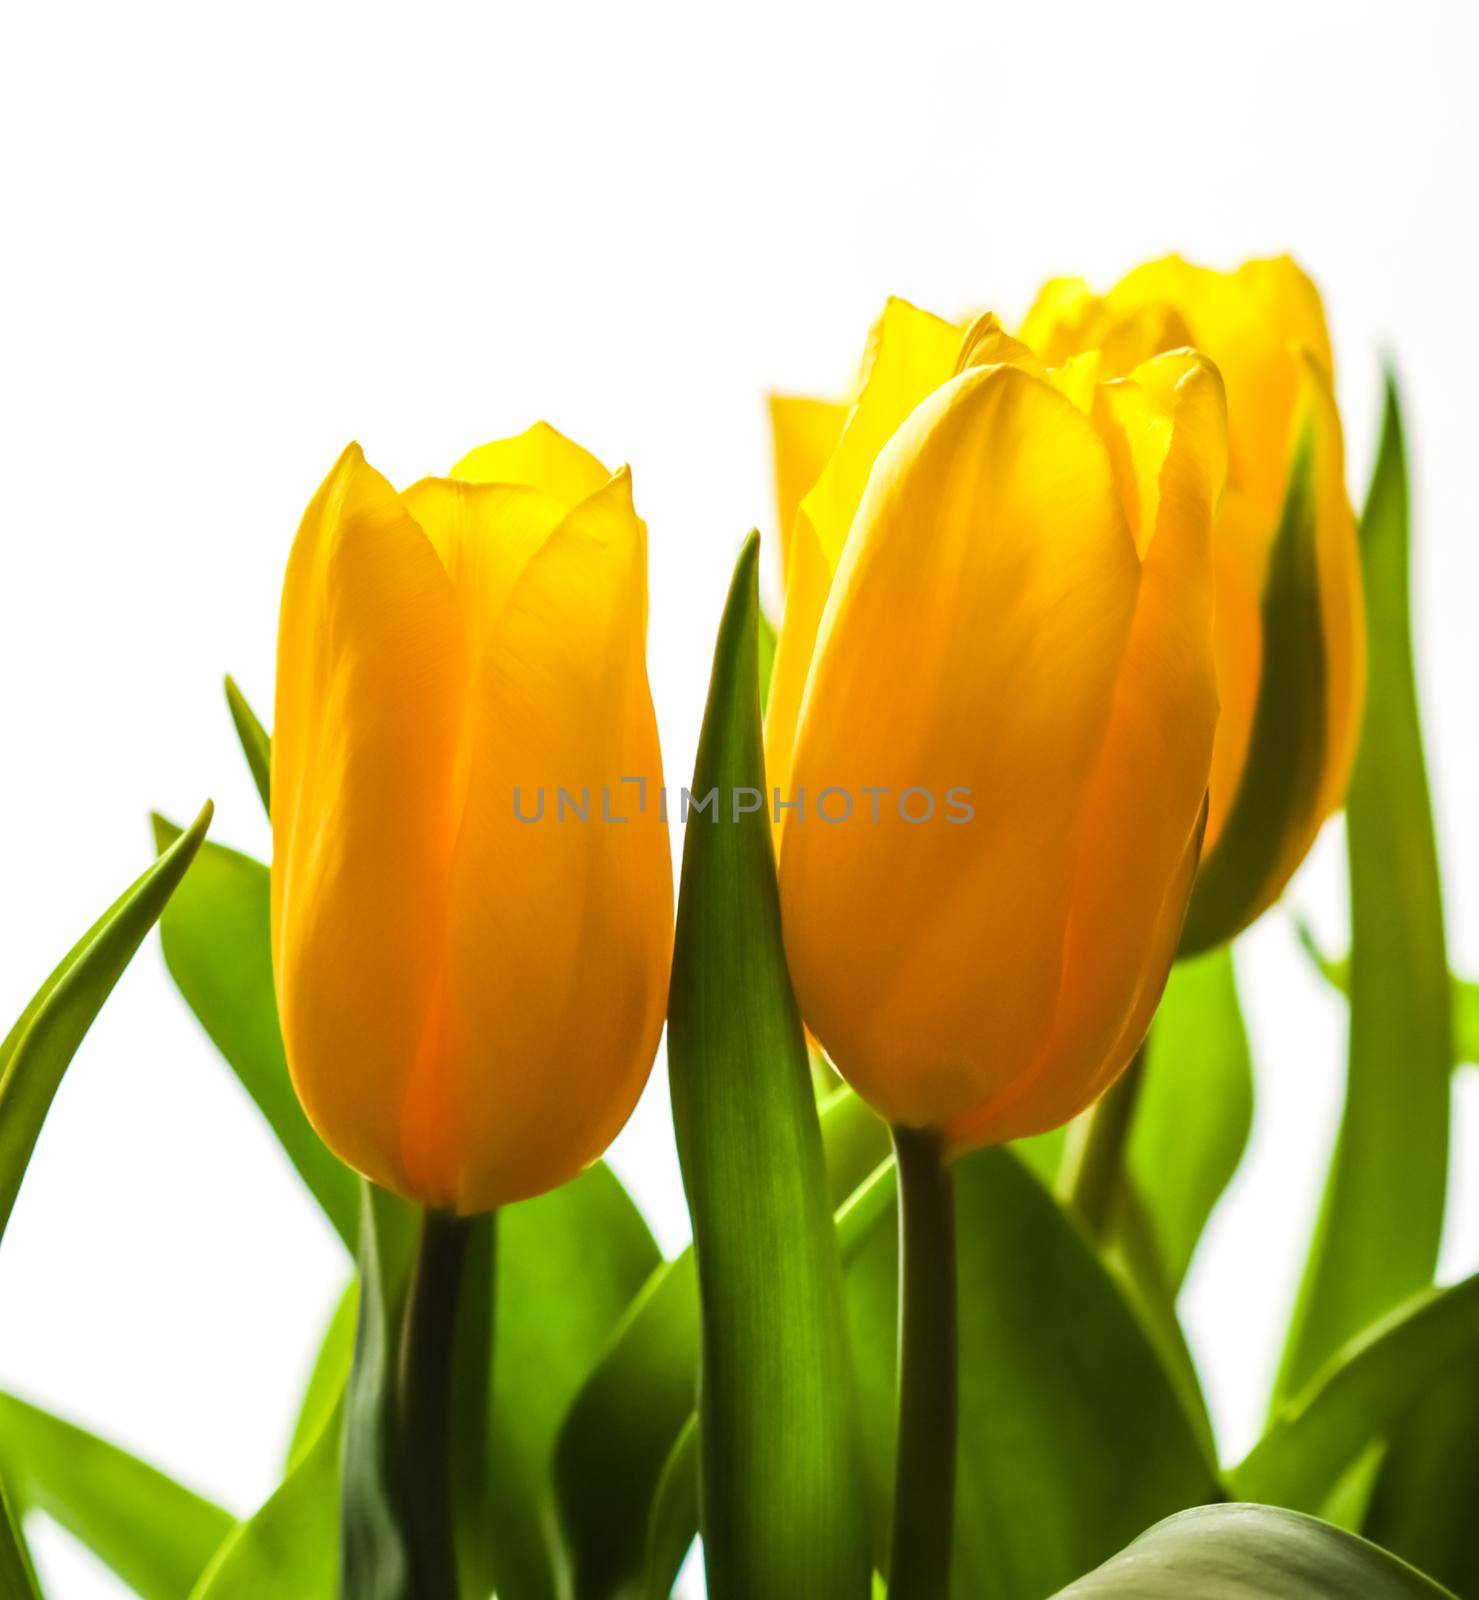 Bouquet of yellow tulips lit by sunlight on a white background. Perfect for greeting card.